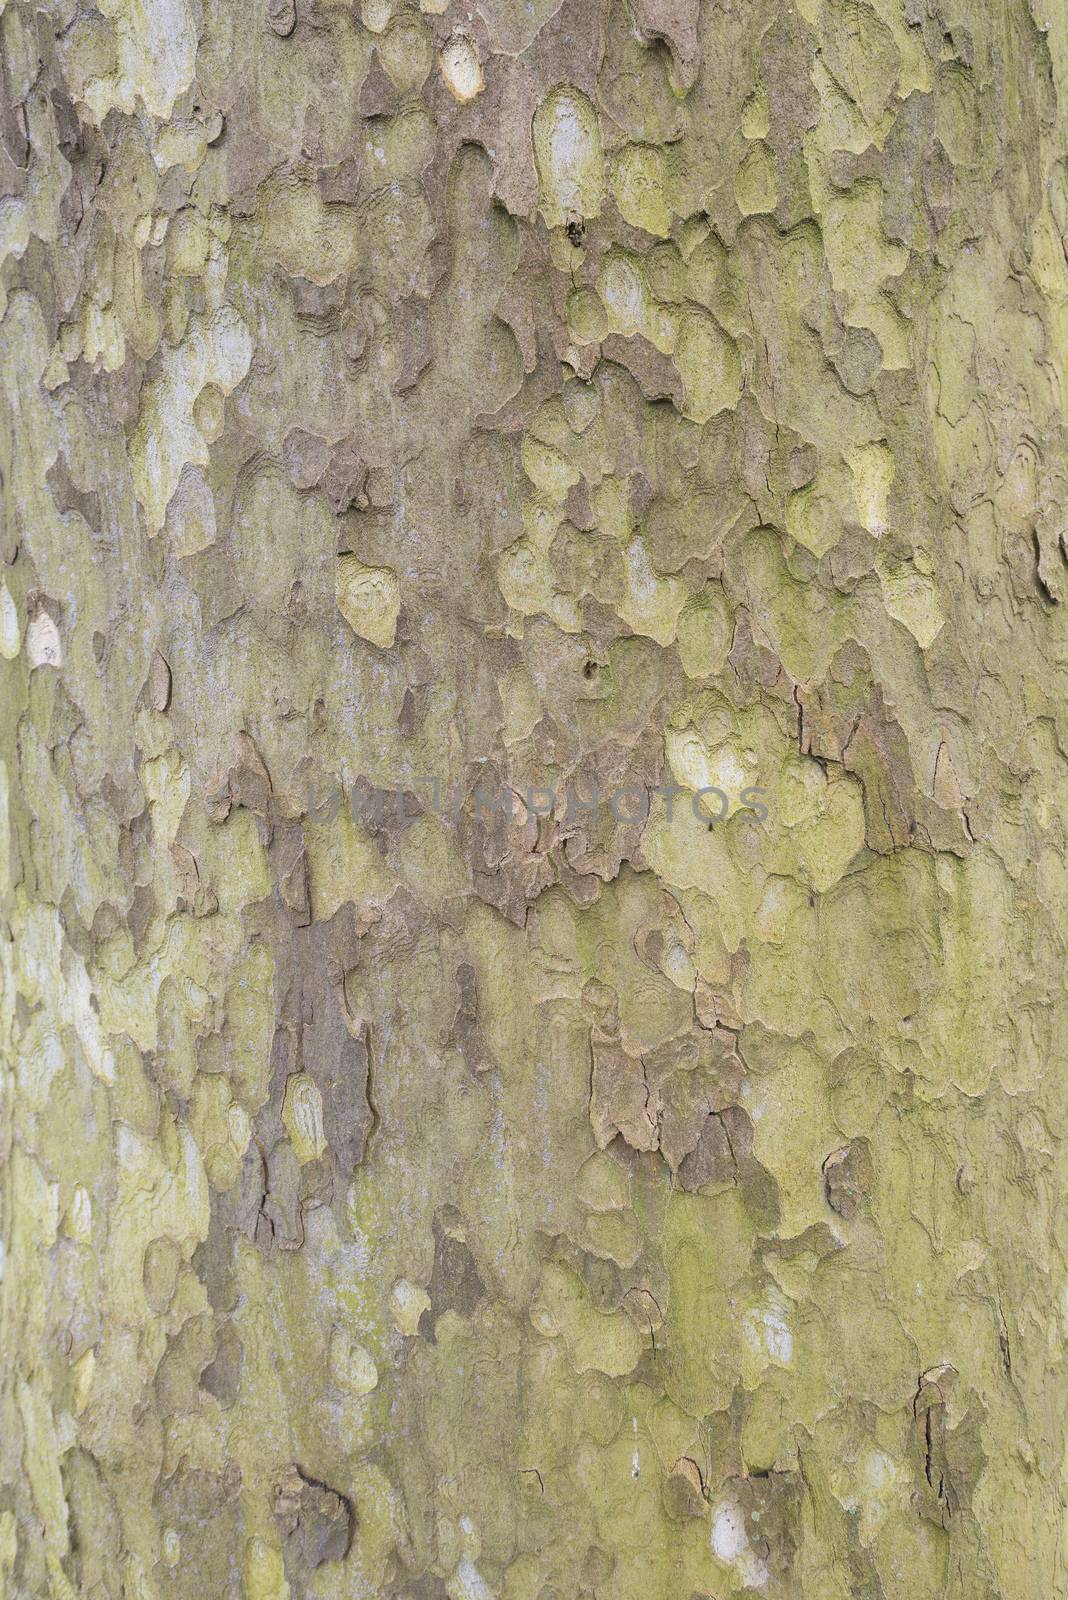 Tree bark of a Sycamore tree
 by Tofotografie